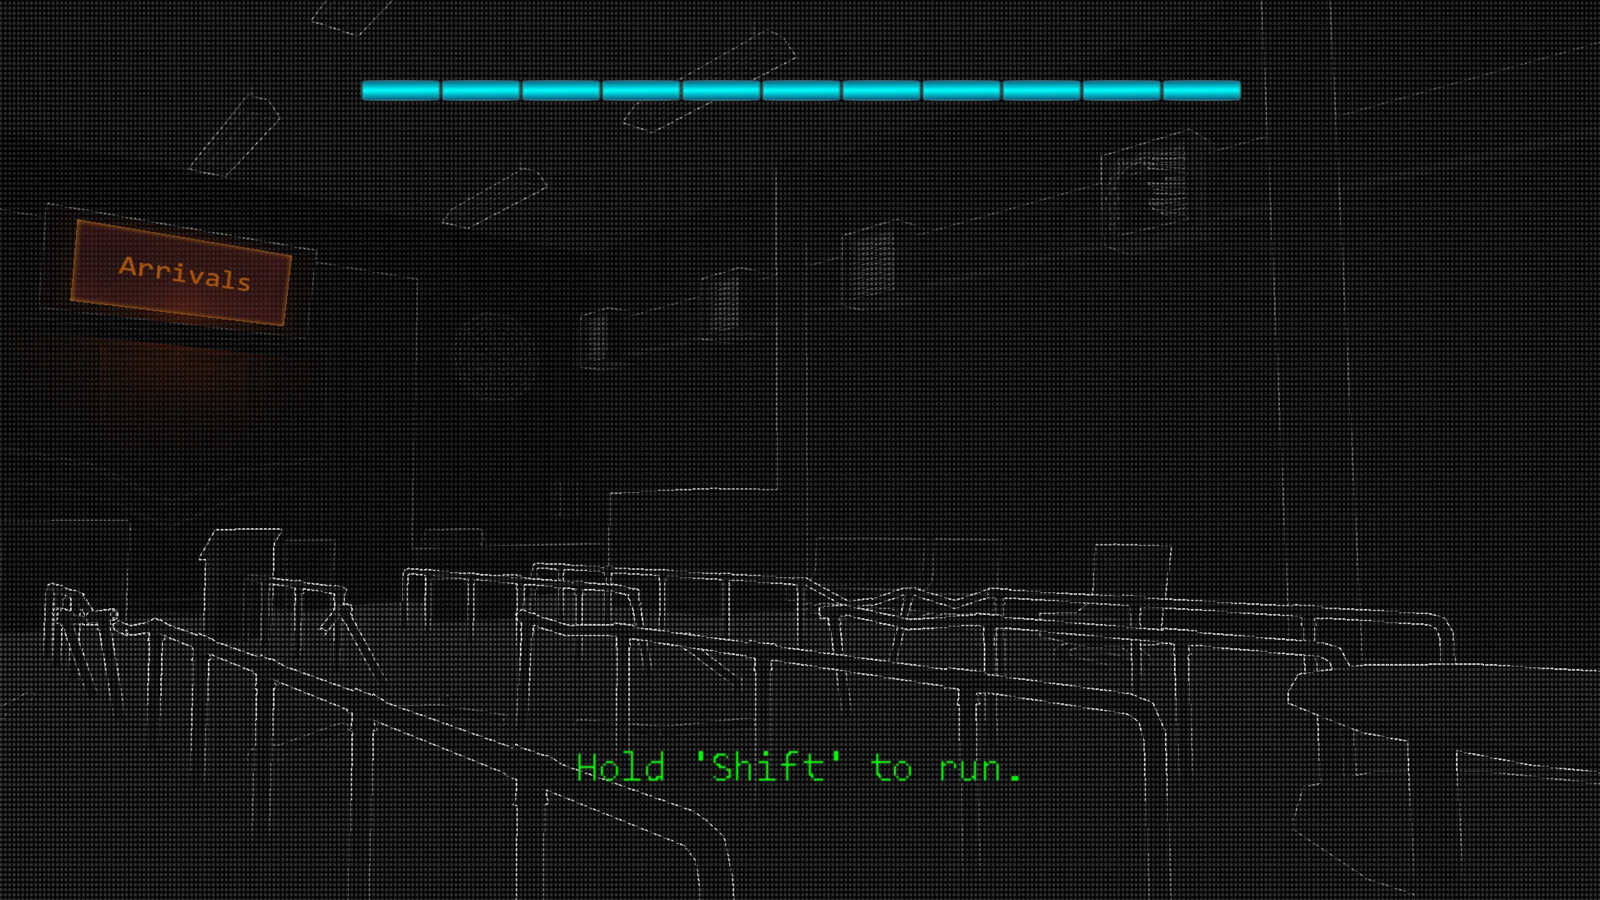 A dark room that says "Arrivals" with a "hold Shift to run" instruction.